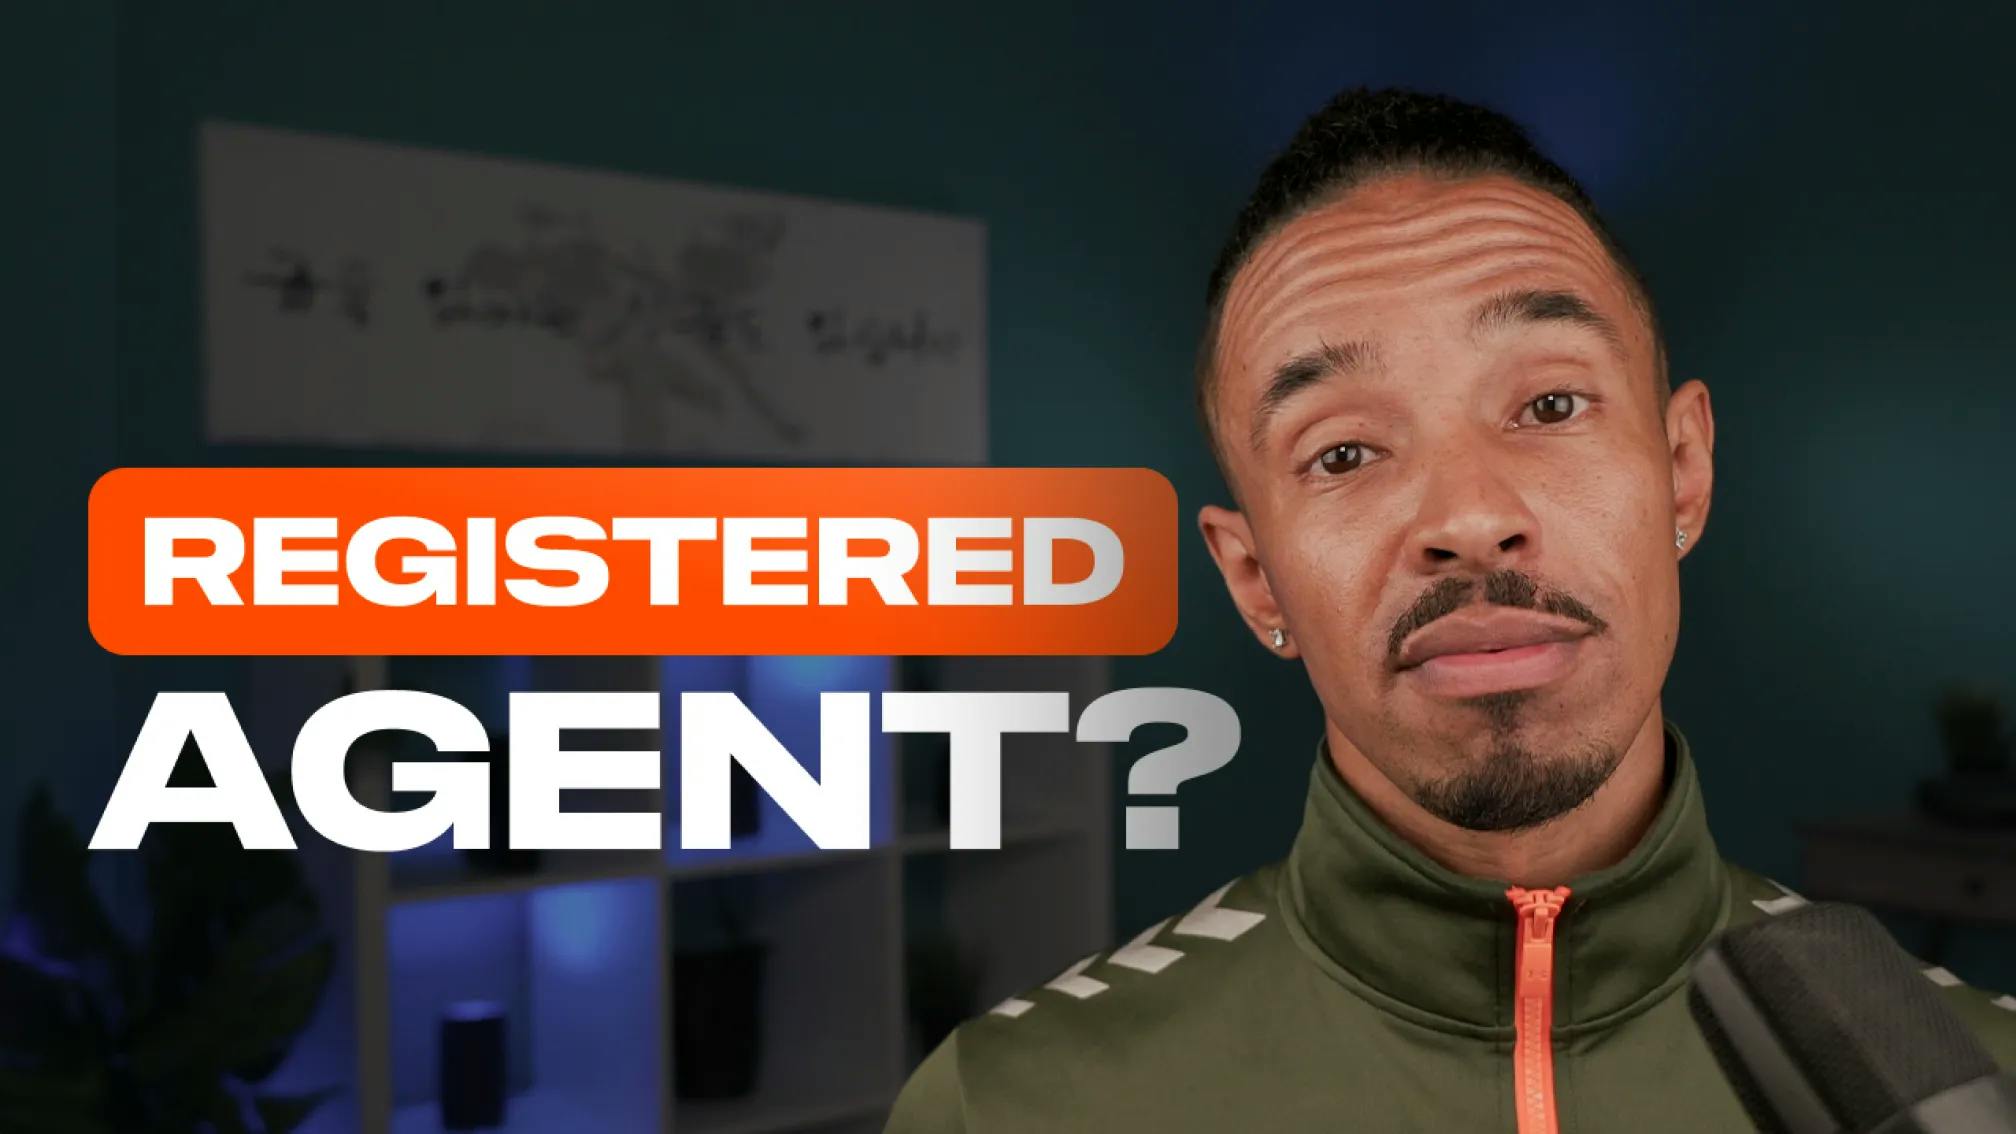 YouTube Video Thumbnail Presenting Movie About Registered Agent